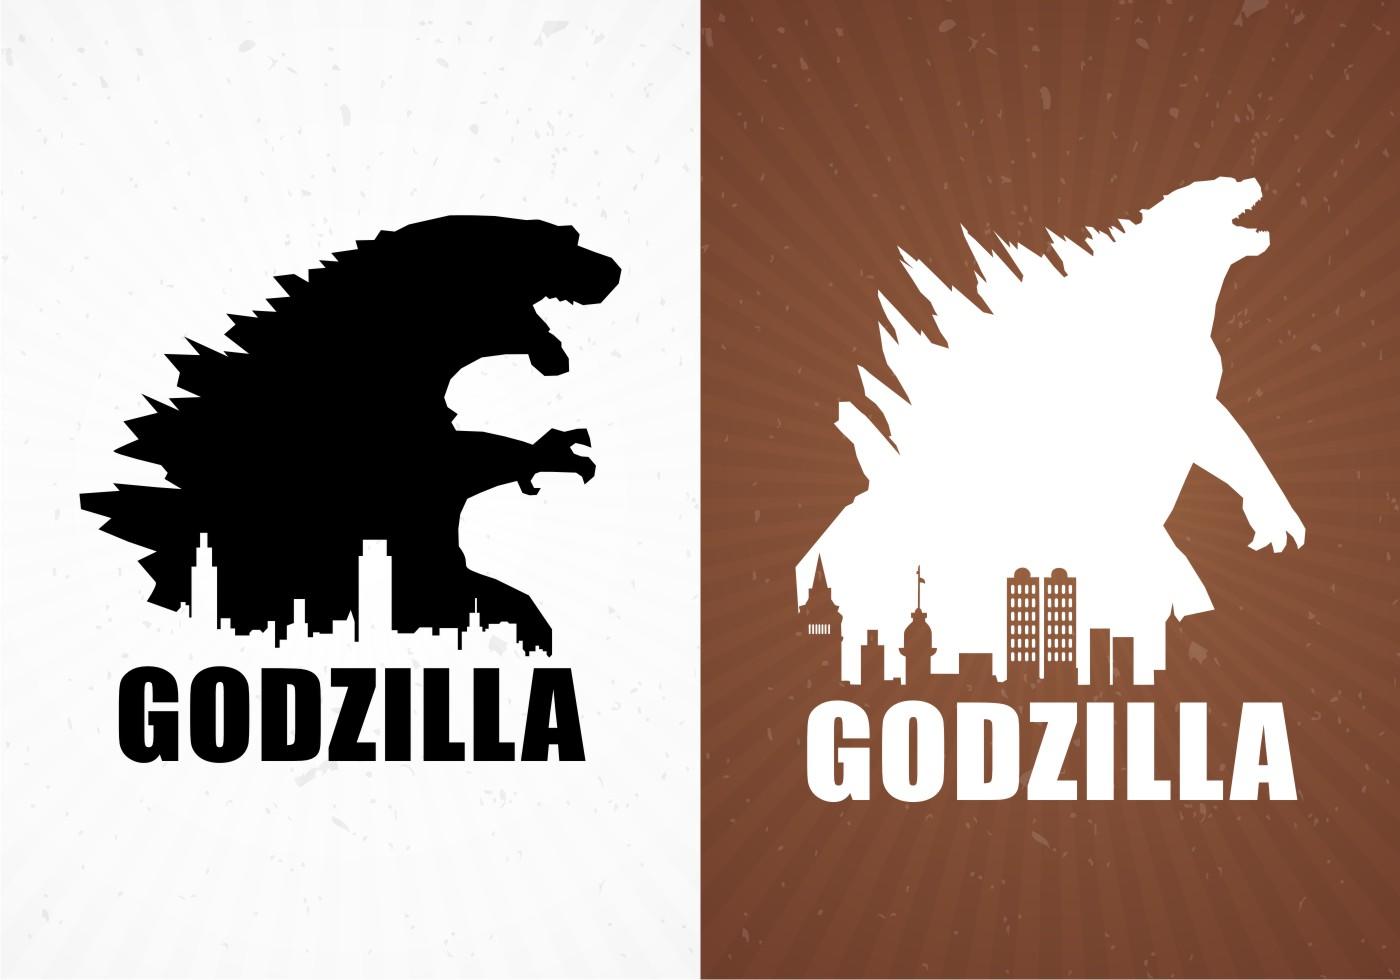 Godzilla Movie Poster Backgrounds Free Vector.